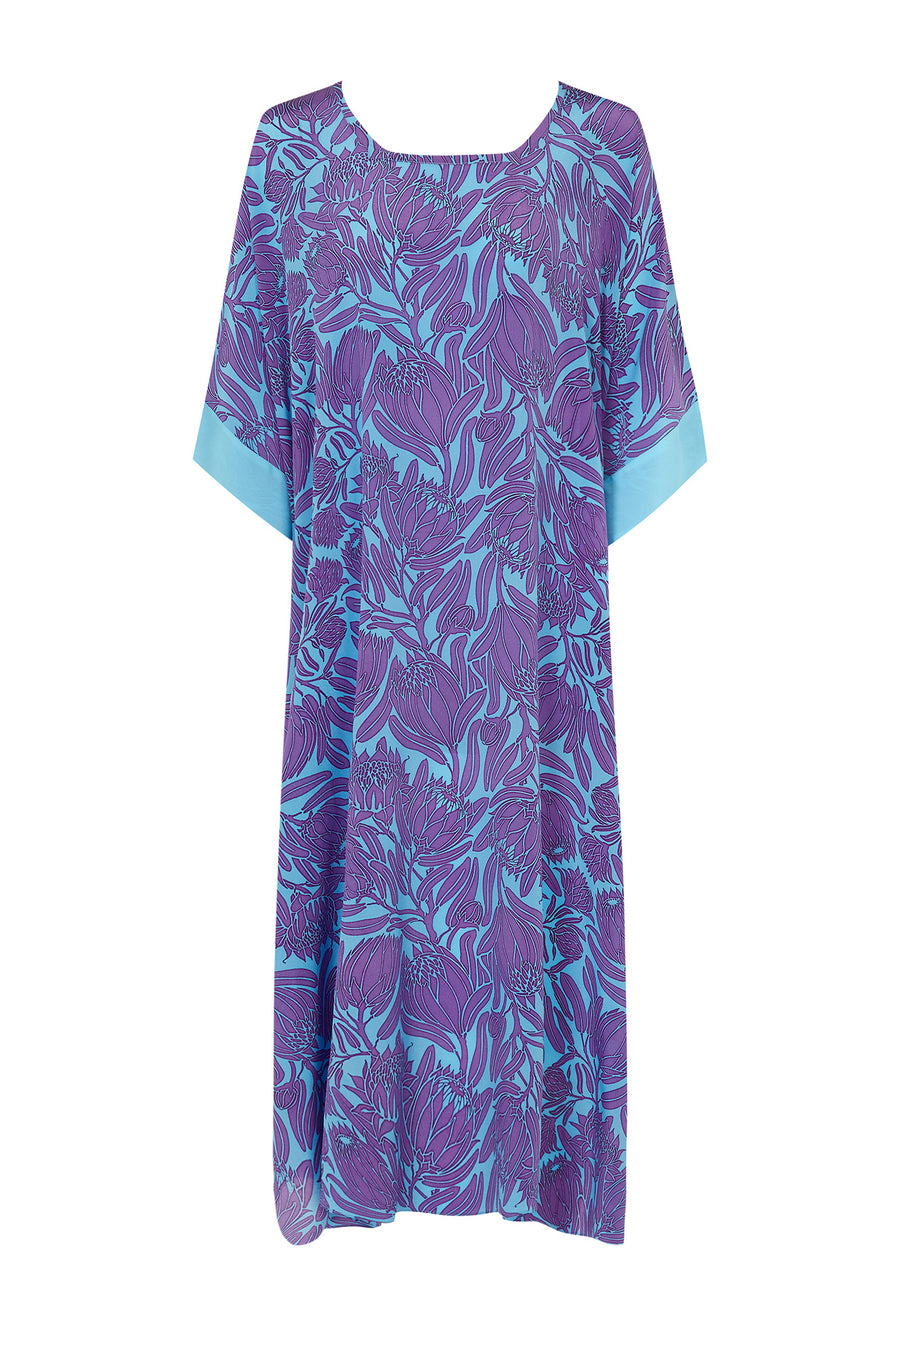 Holiday cover up flowing silk kaftan in violet floral print by designer Lotty B